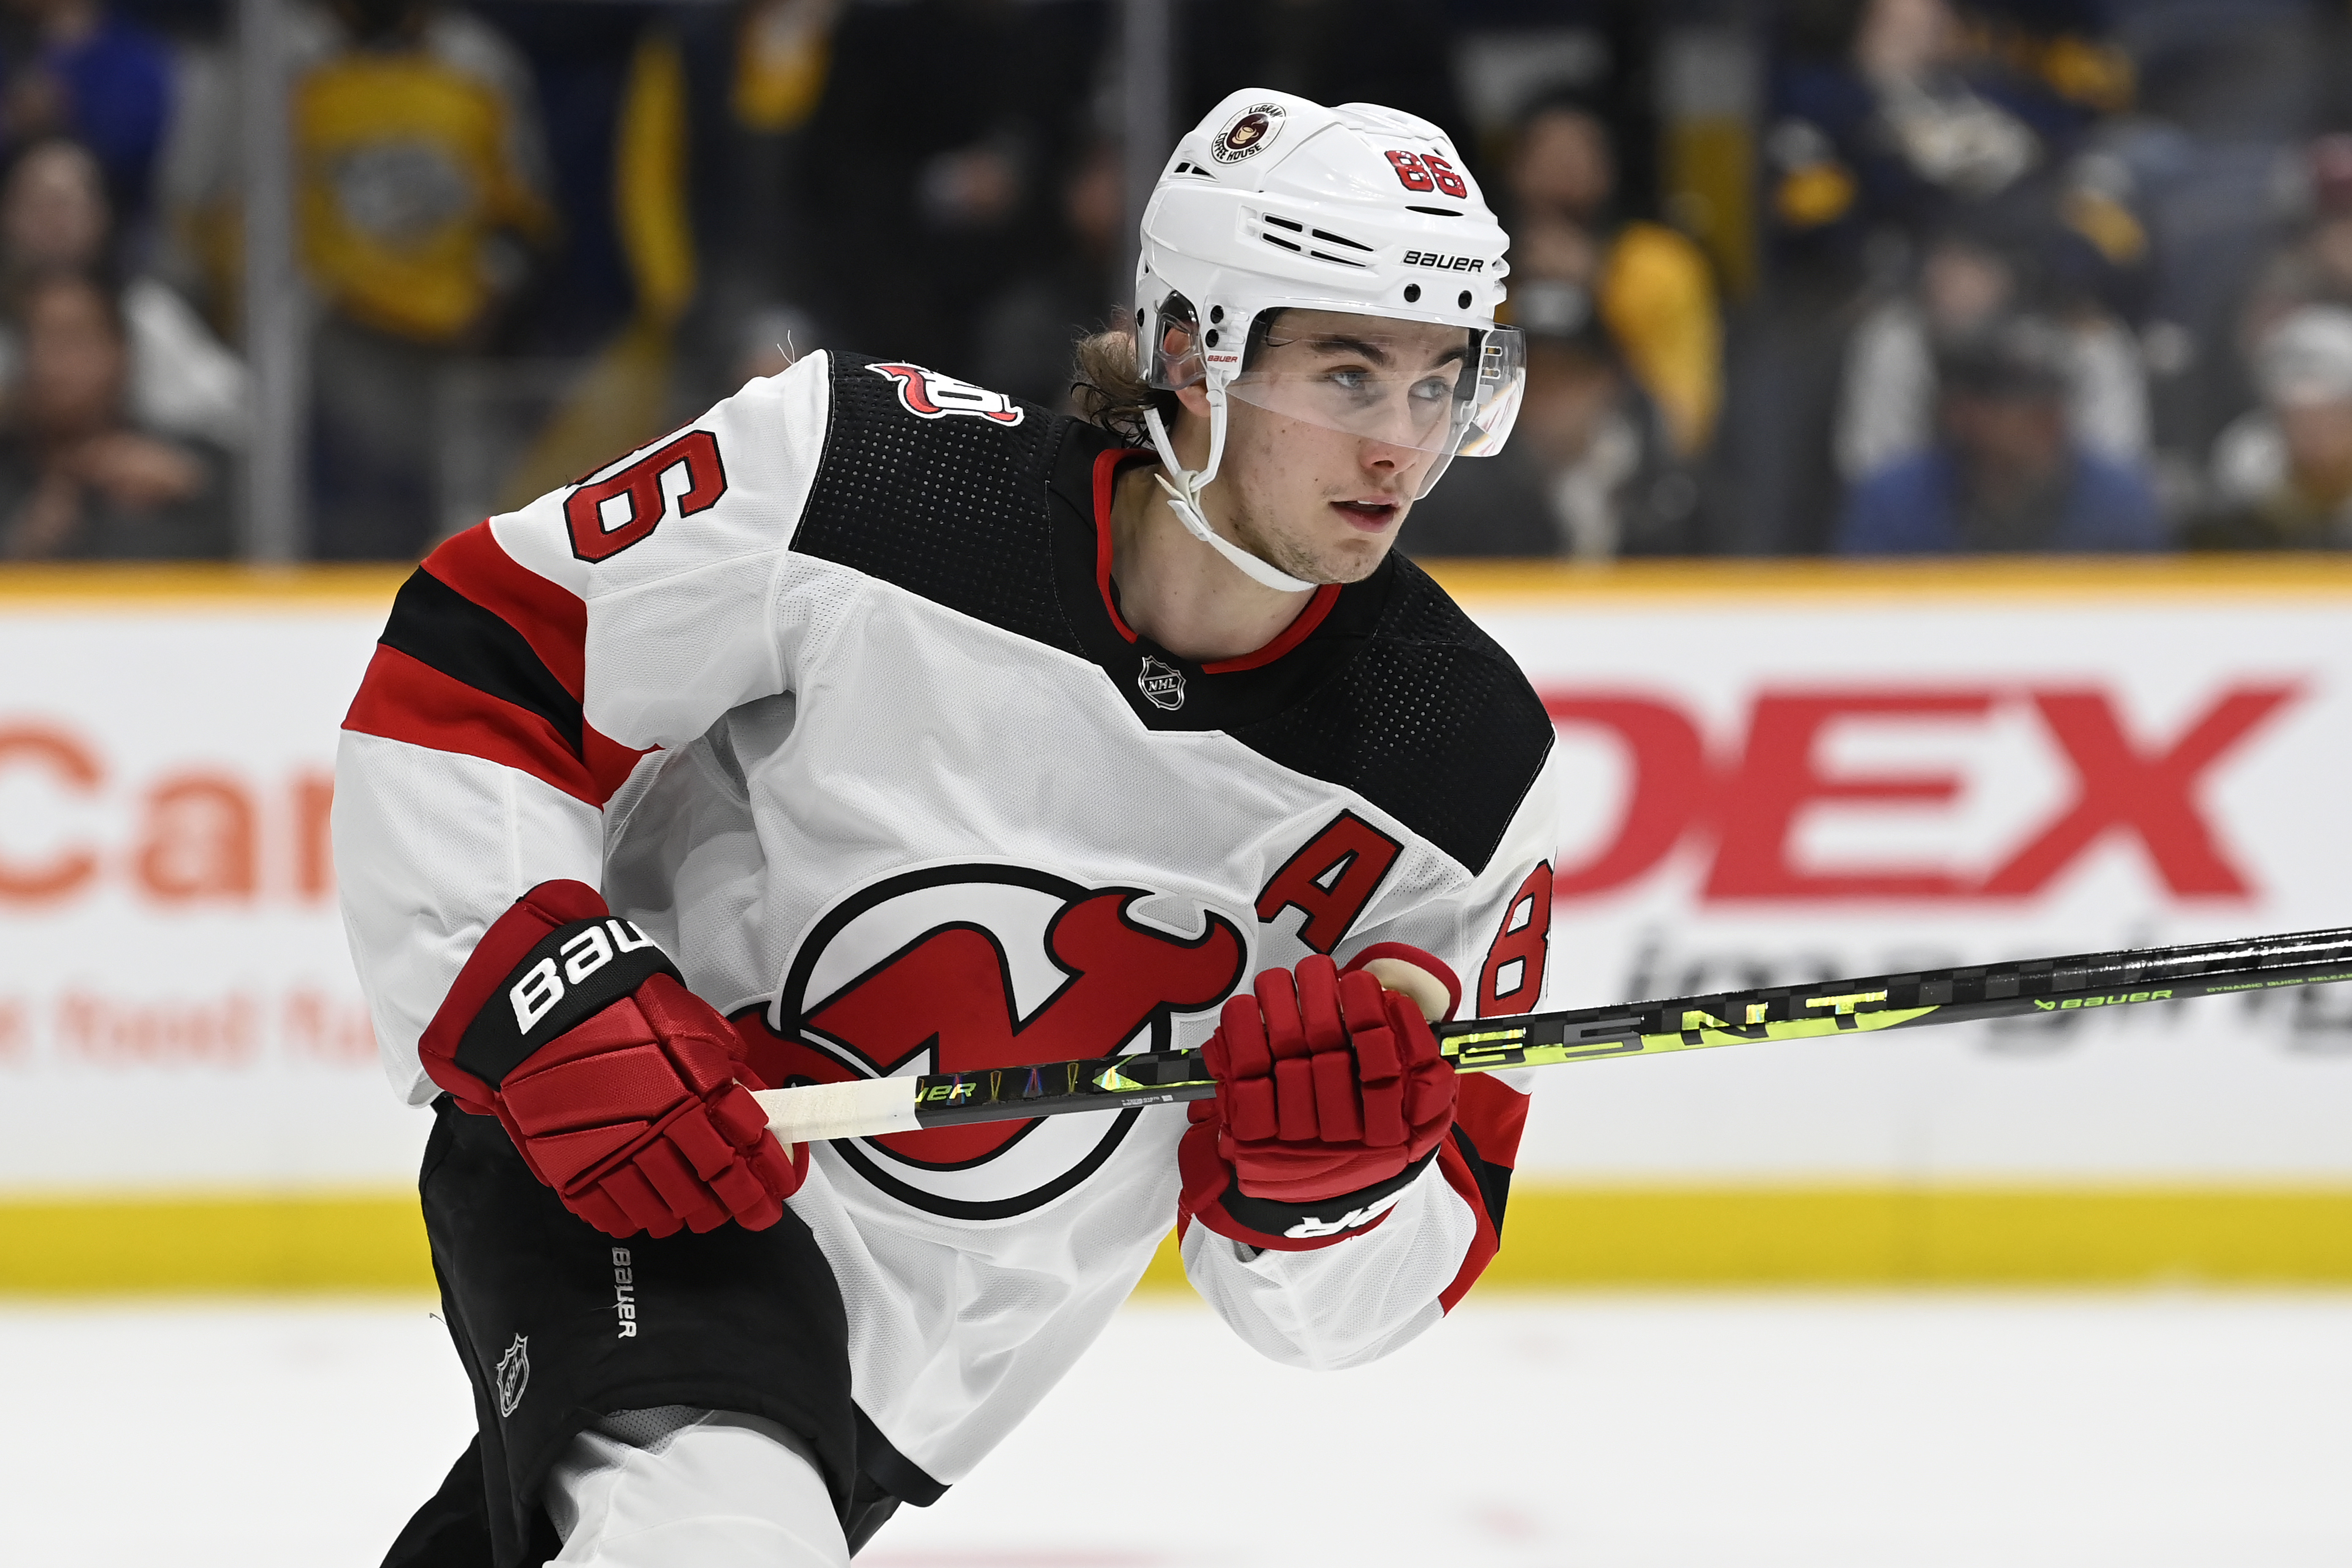 How to watch Devils Jack Hughes at NHL All-Star weekend Free live stream, time, TV, channel for 2023 NHL All-Star Game, Skills Competition